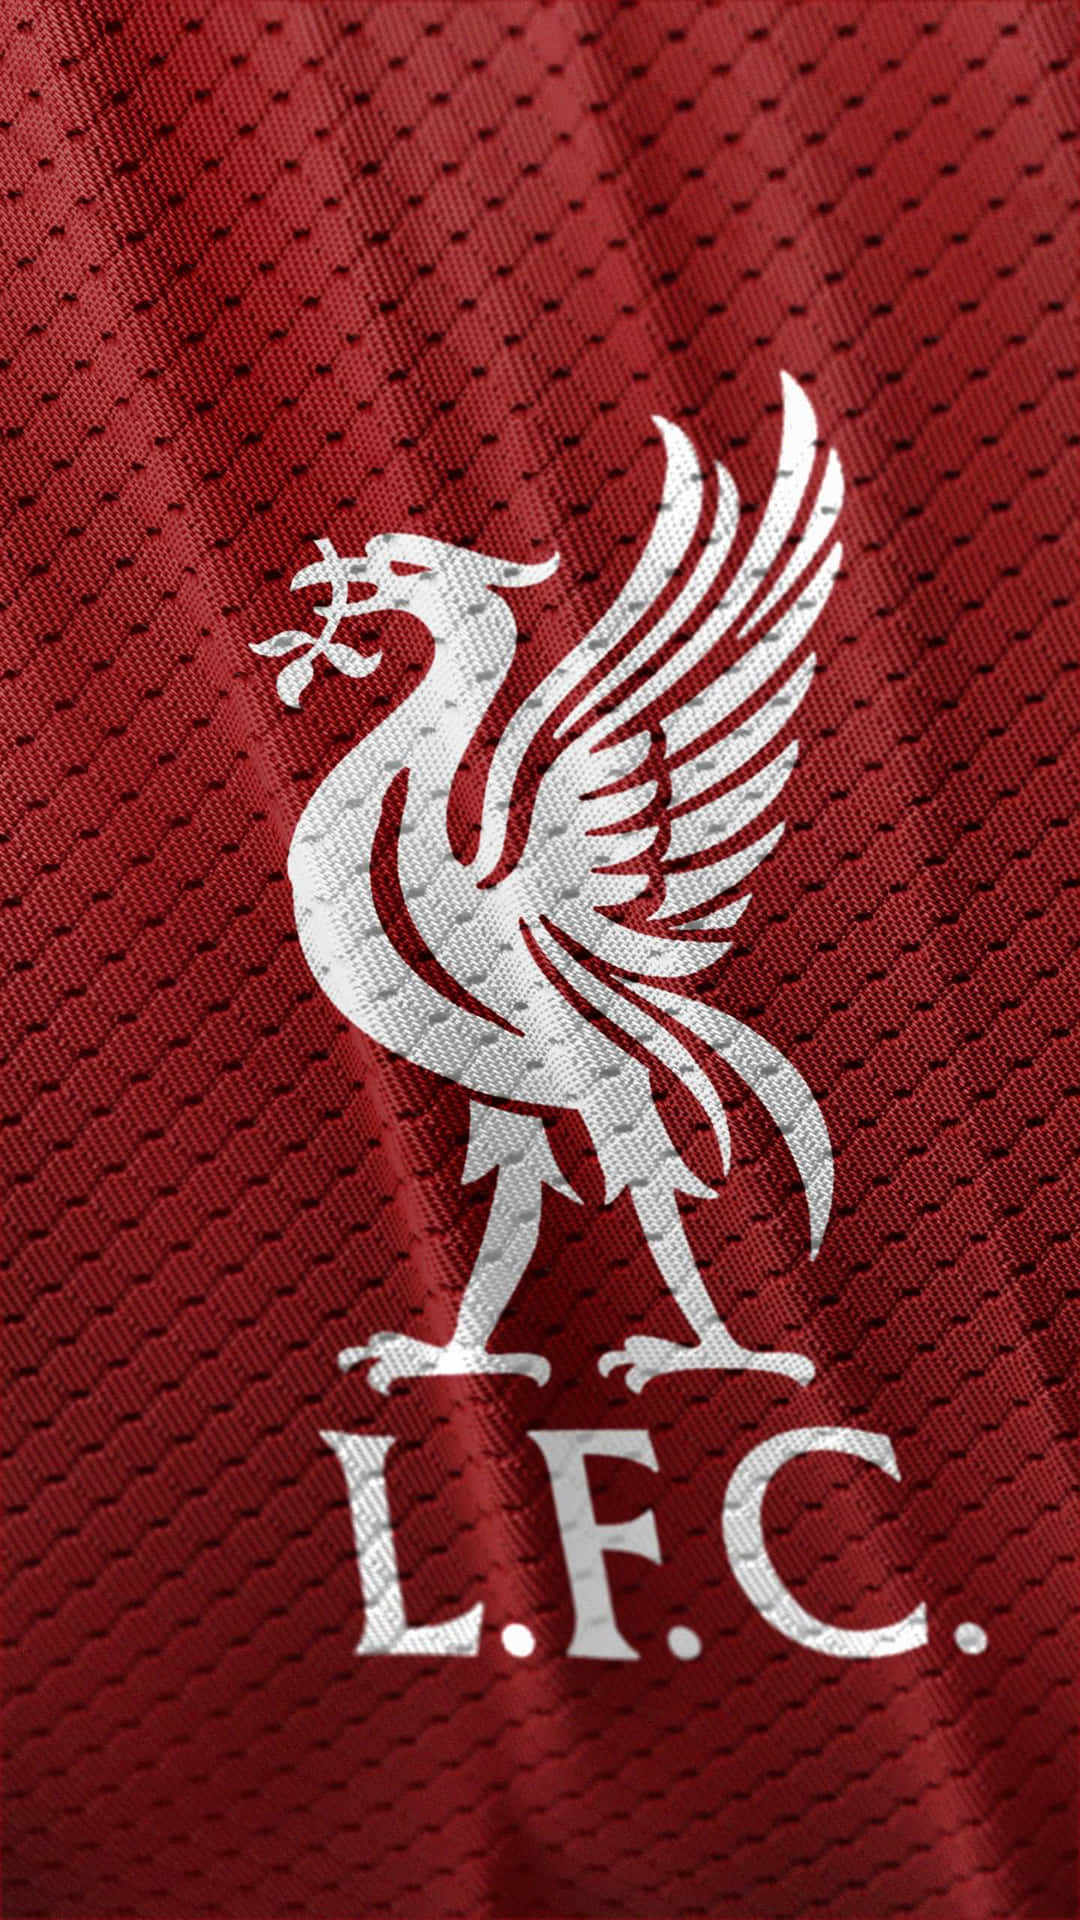 Get the Liverpool Look with an Iphone Wallpaper